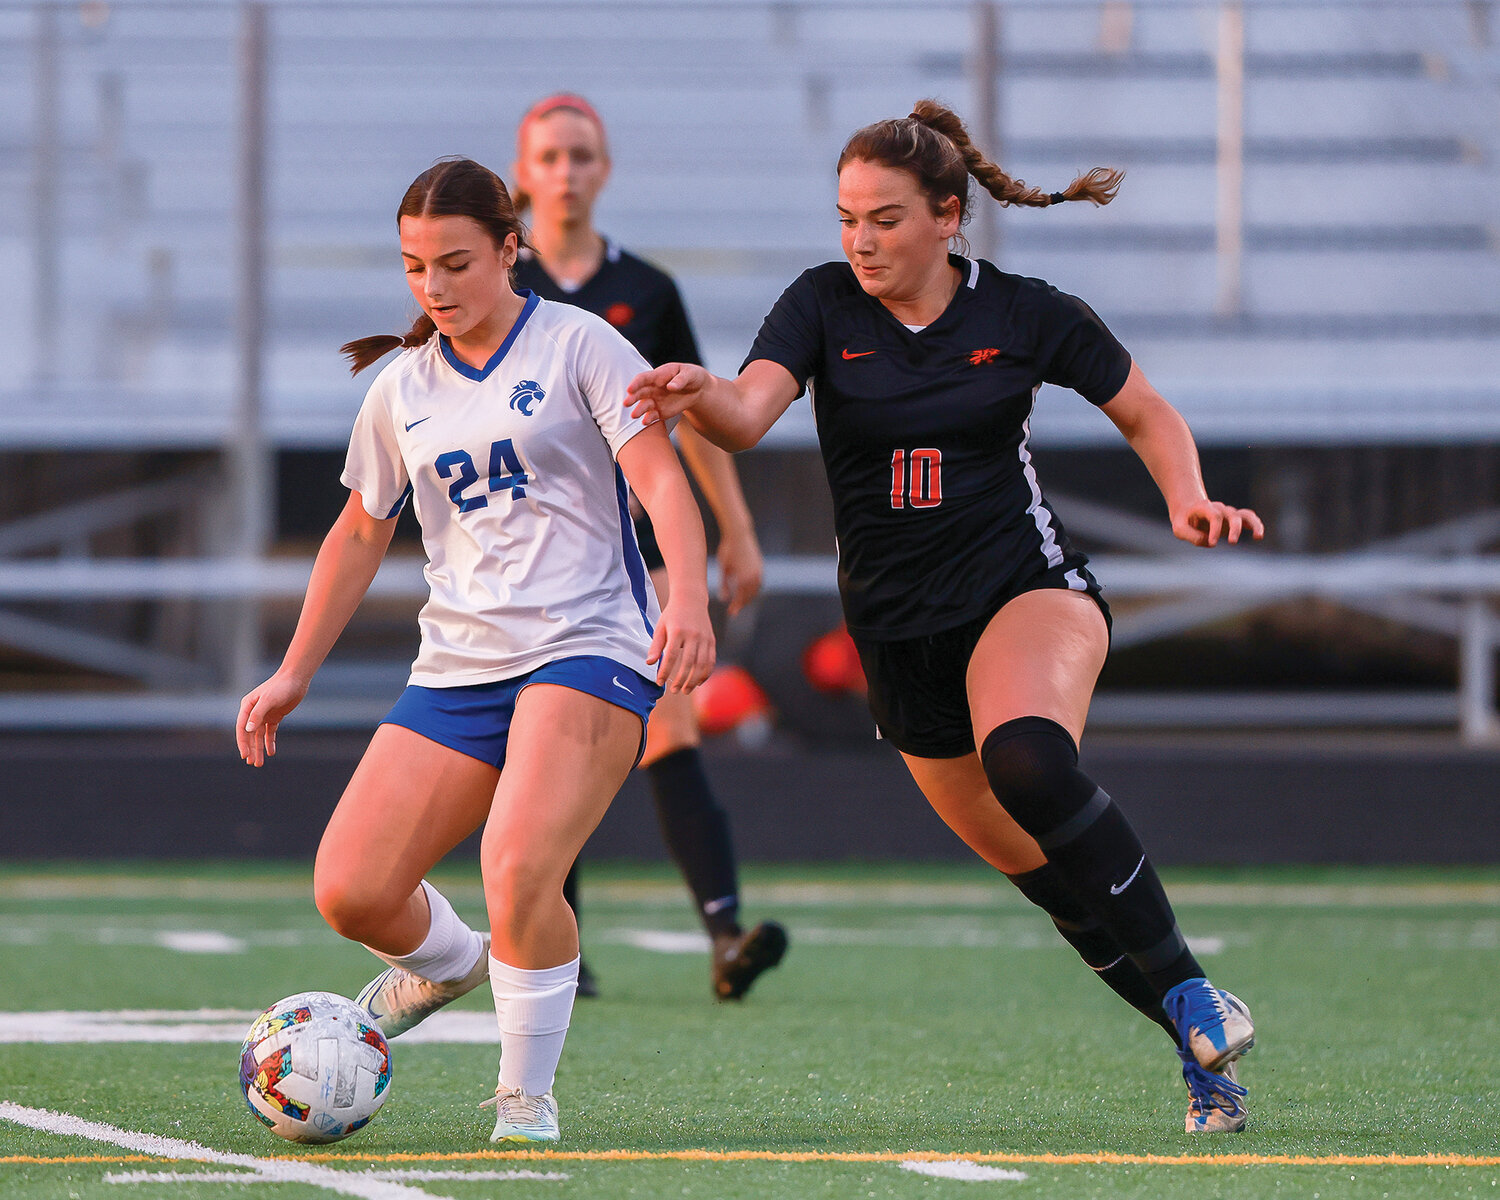 Battle Ground sophomore Avery Reese defends La Center sophomore Briley Vanderhoef during the Tigers’ 1-0 win over La Center on Tuesday, Sept. 12.